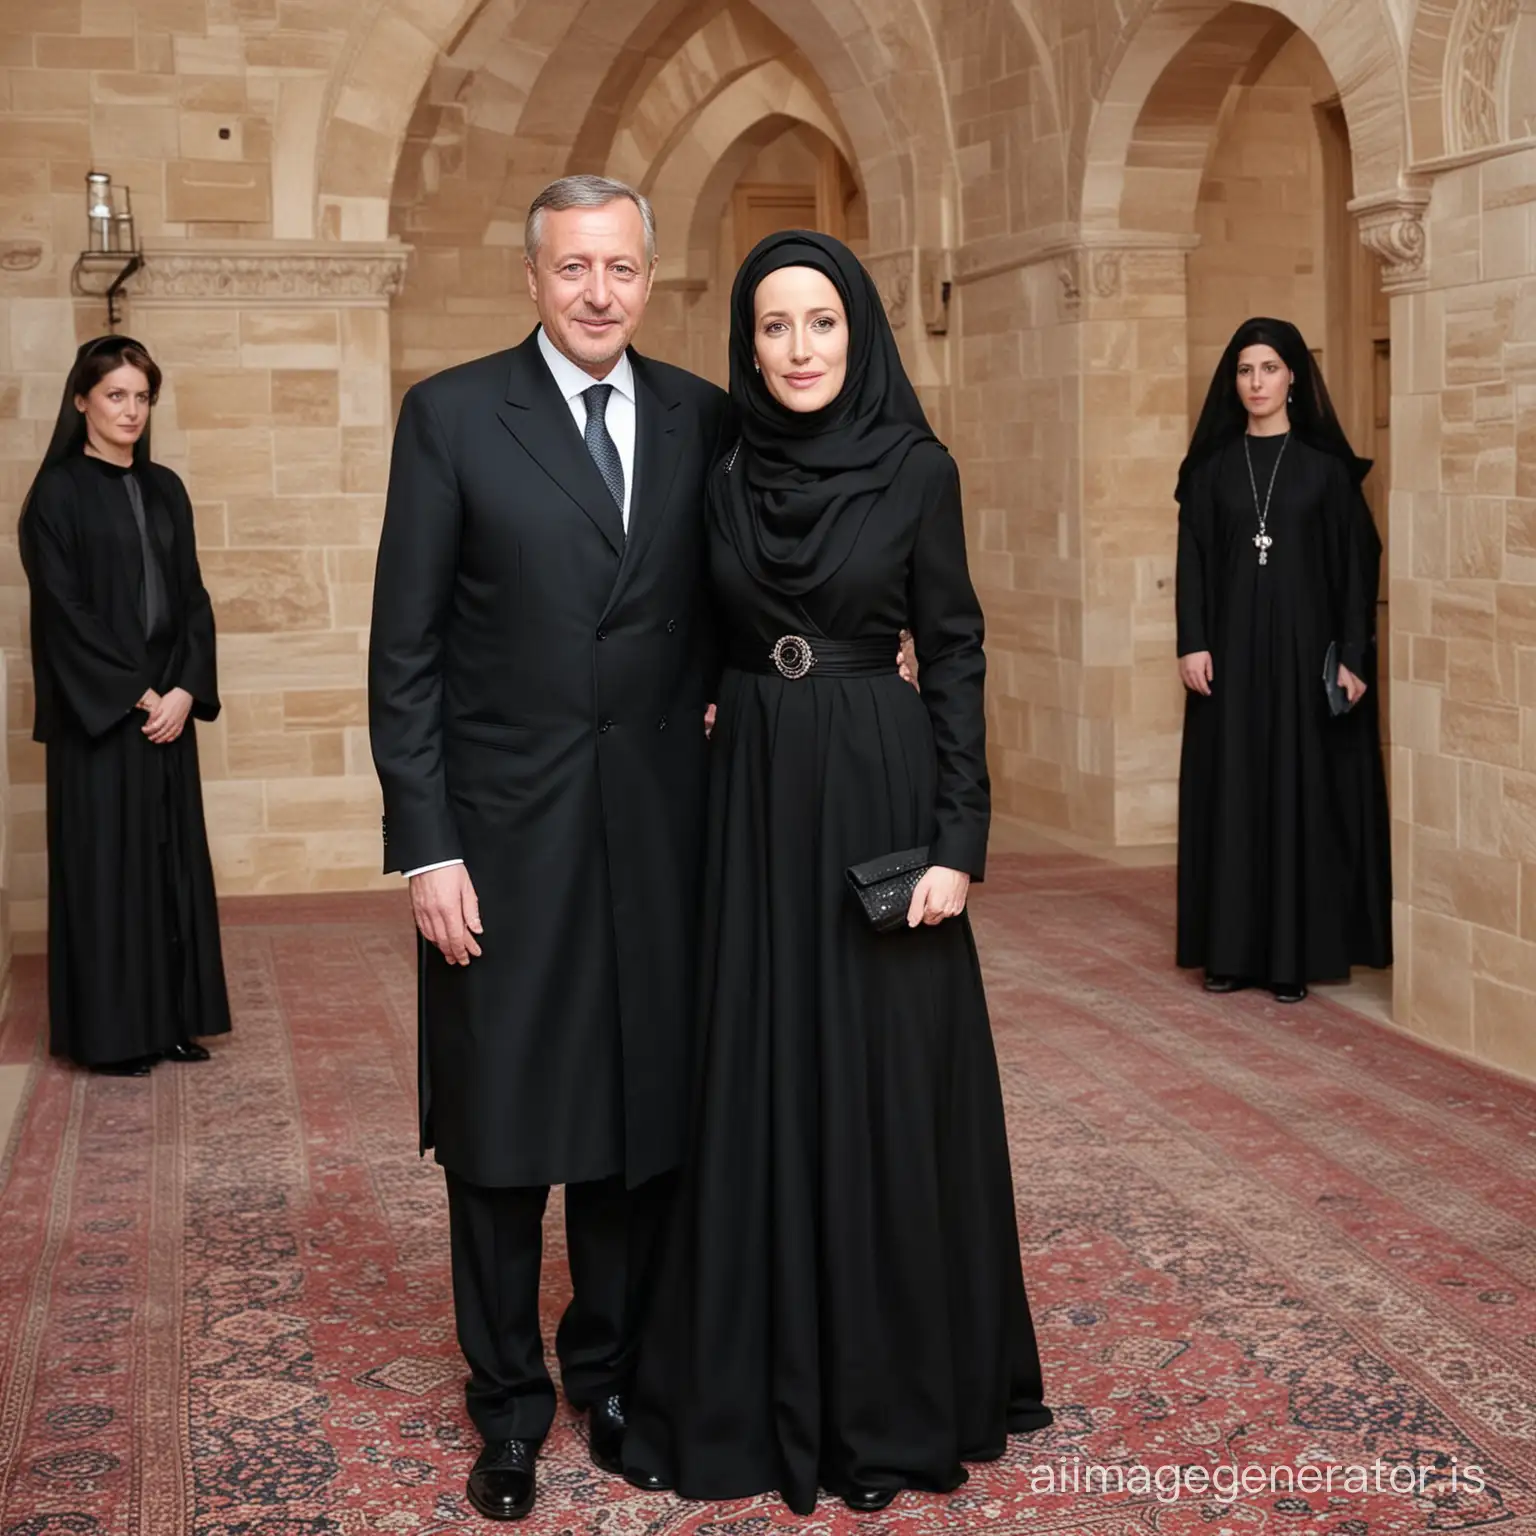 Gillian Anderson marrying President Erdogan, he asked Gillian to dress accordingly to his Muslim faith and wear a floor-length black abaya with long black hijab and stand demurely beside him as Emine Erdogan, his newlywed devoted wife